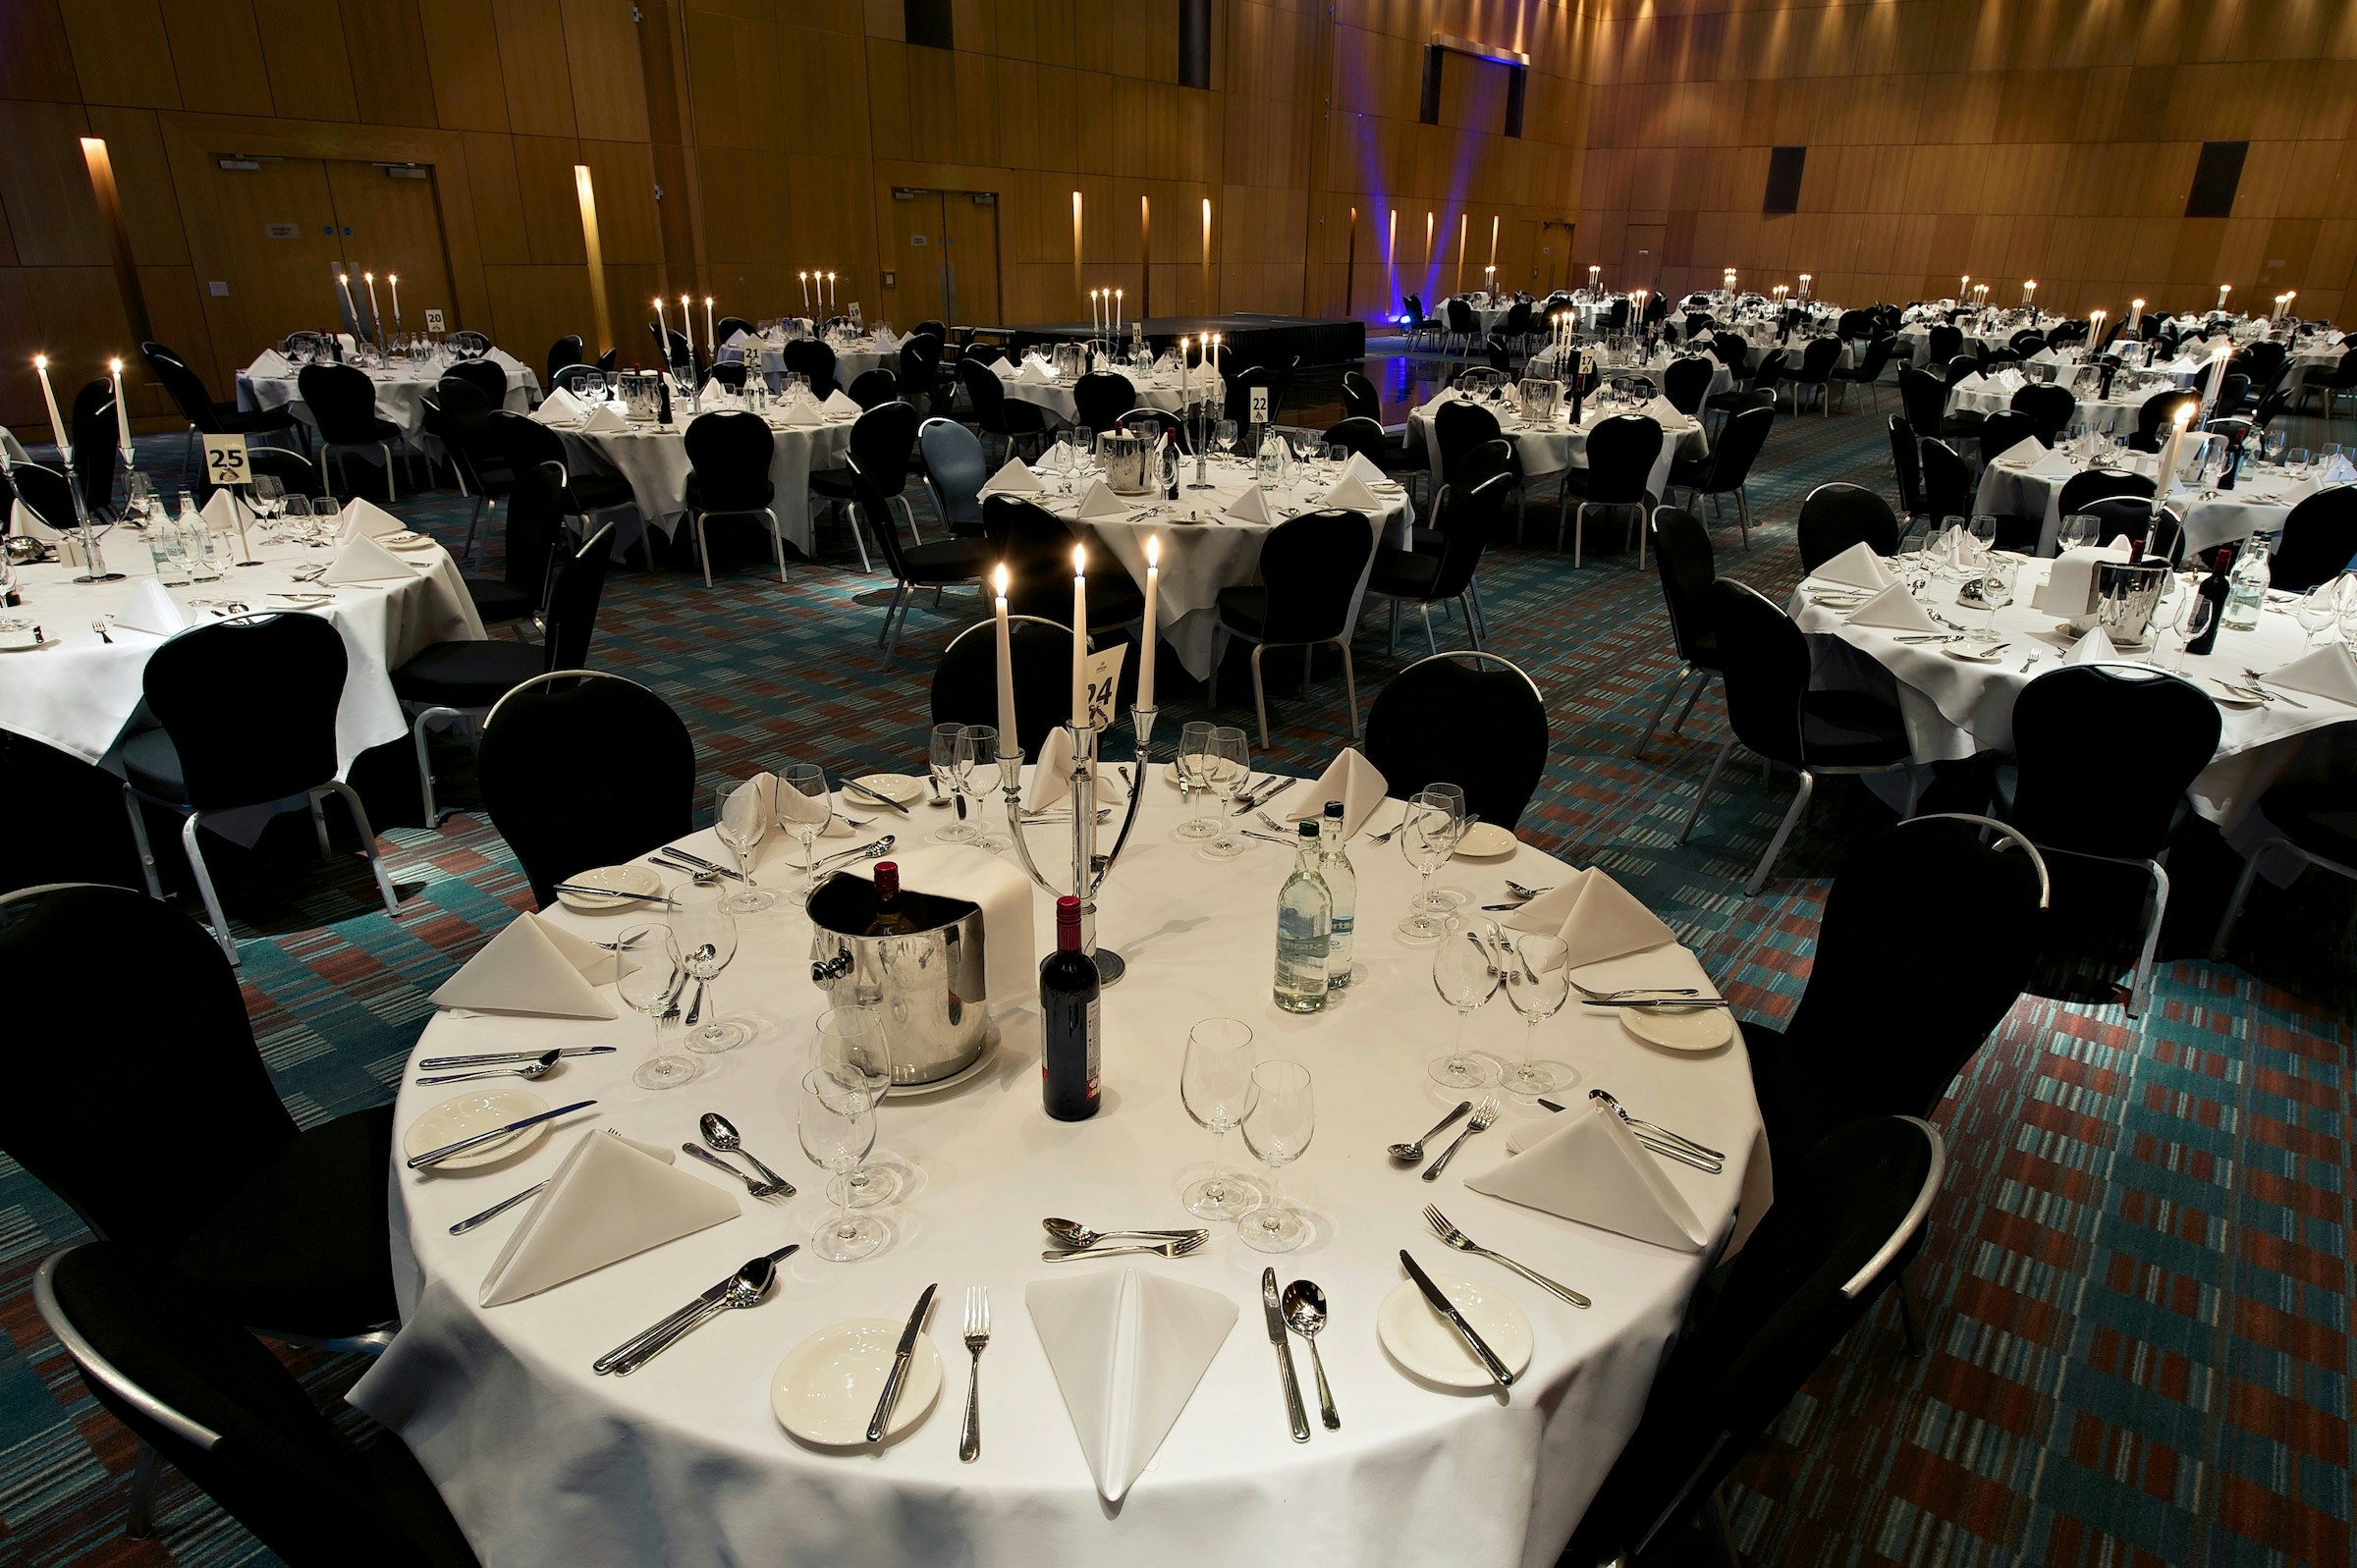 Hotel Conference Venues in Manchester - Hilton Deansgate